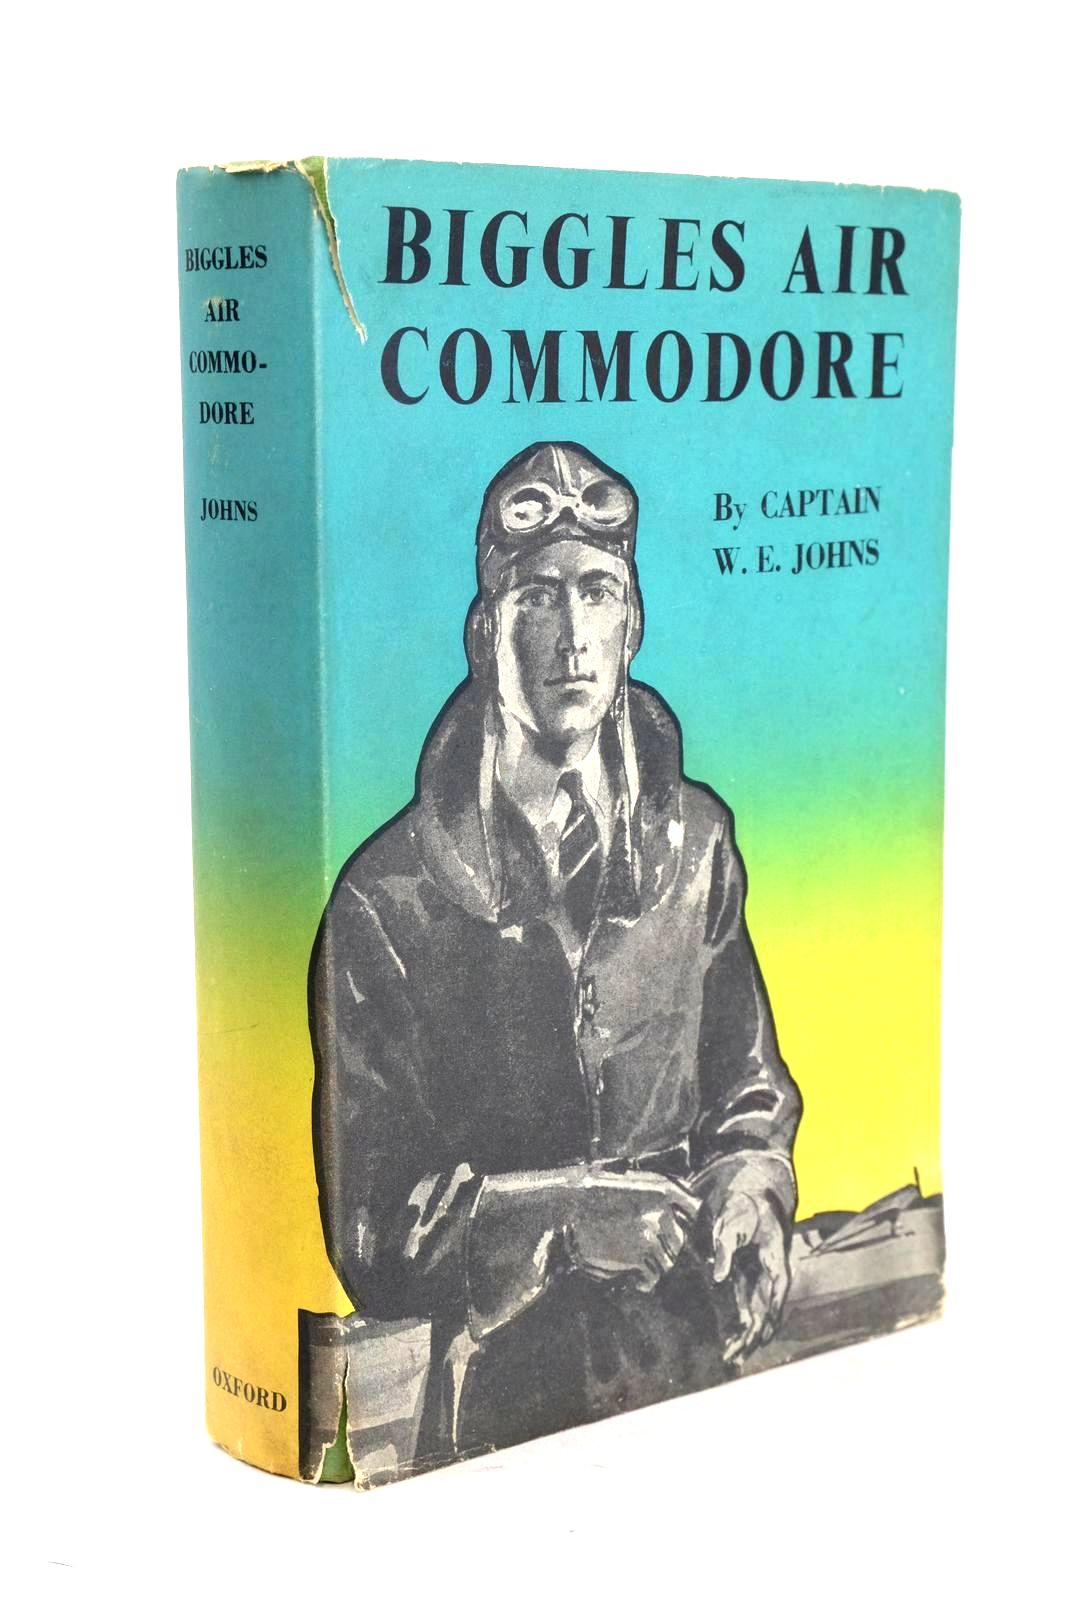 Photo of BIGGLES AIR COMMODORE written by Johns, W.E. illustrated by Sindall, Alfred published by Oxford University Press, Geoffrey Cumberlege (STOCK CODE: 1326364)  for sale by Stella & Rose's Books